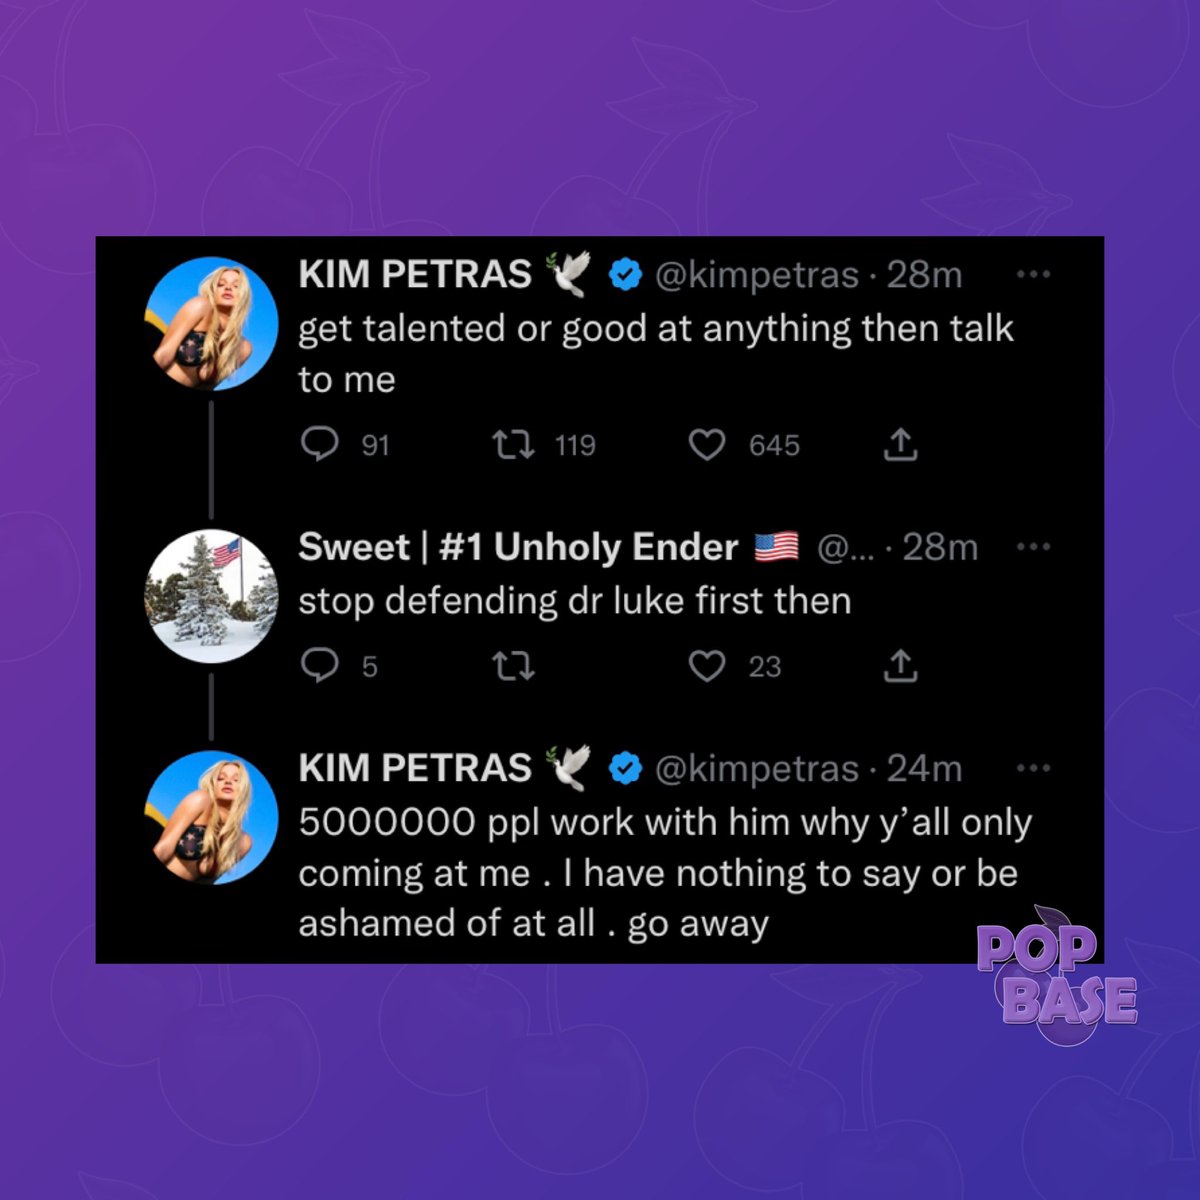 Kim Petras defends her decision to work with Dr. Luke, the alleged rapist of Kesha, in a now deleted tweet. “I have nothing to say or be ashamed of. go away.”